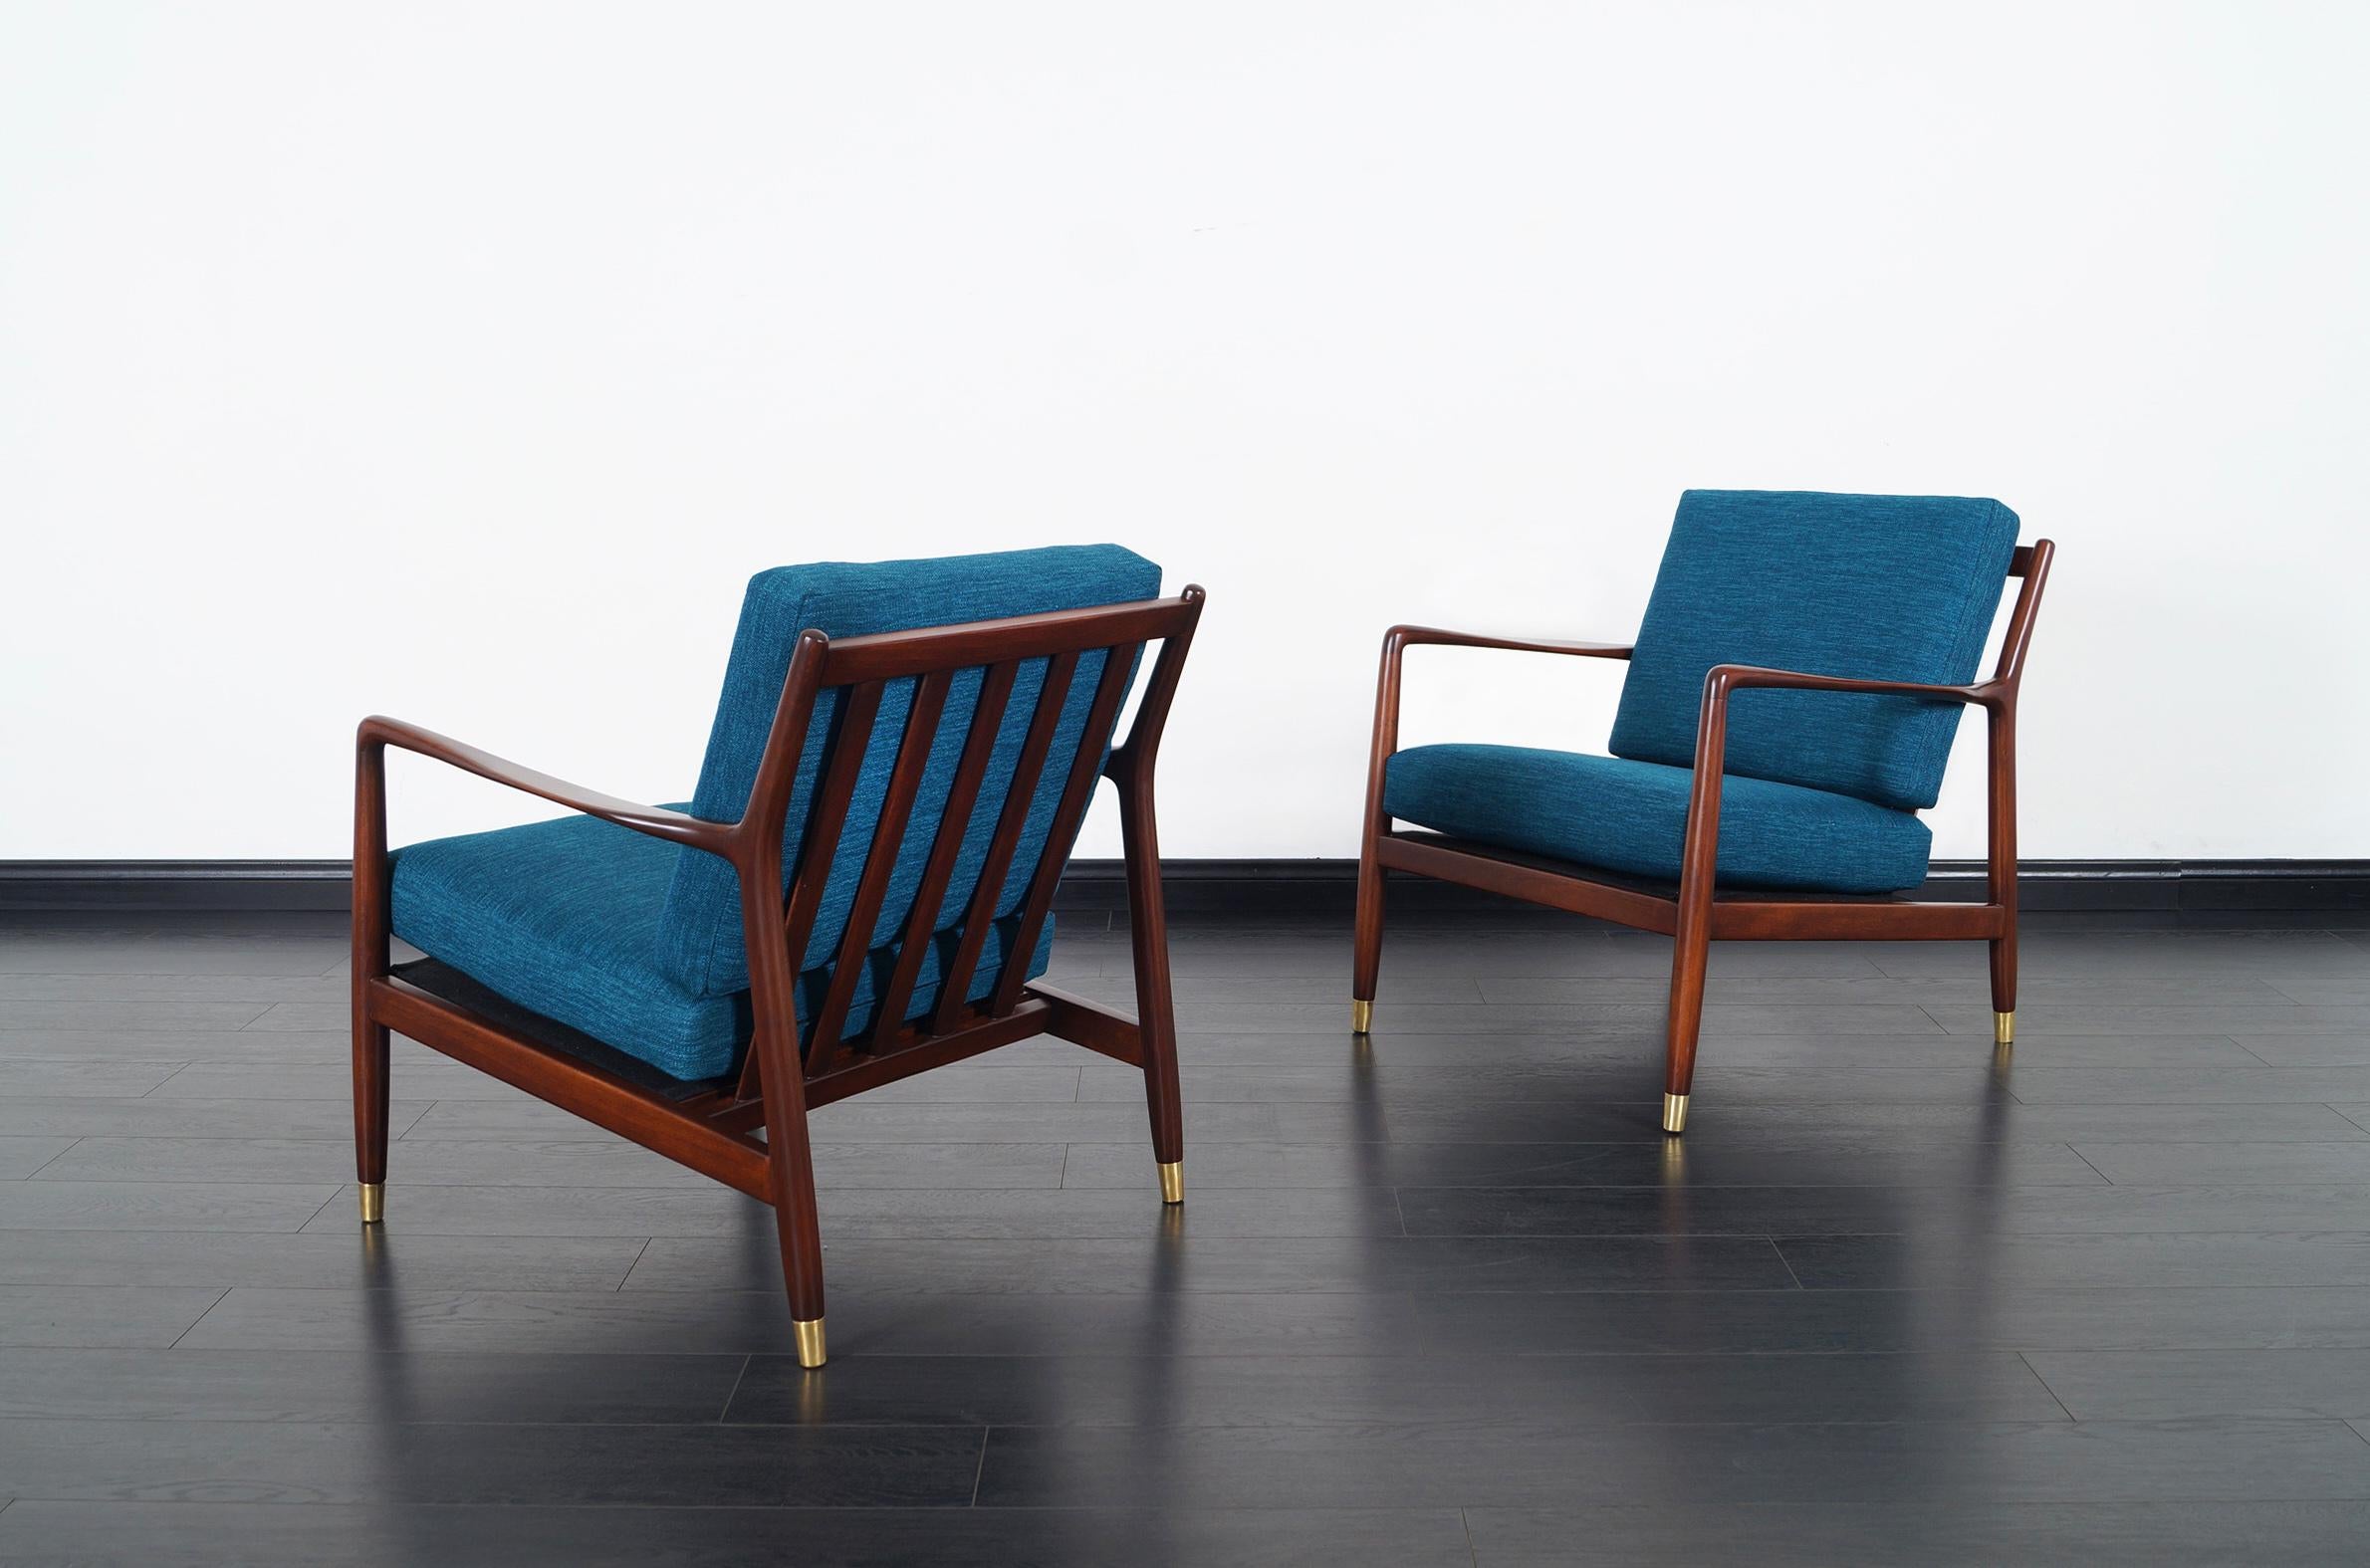 Pair of vintage lounge chairs designed by Folke Ohlsson for DUX.